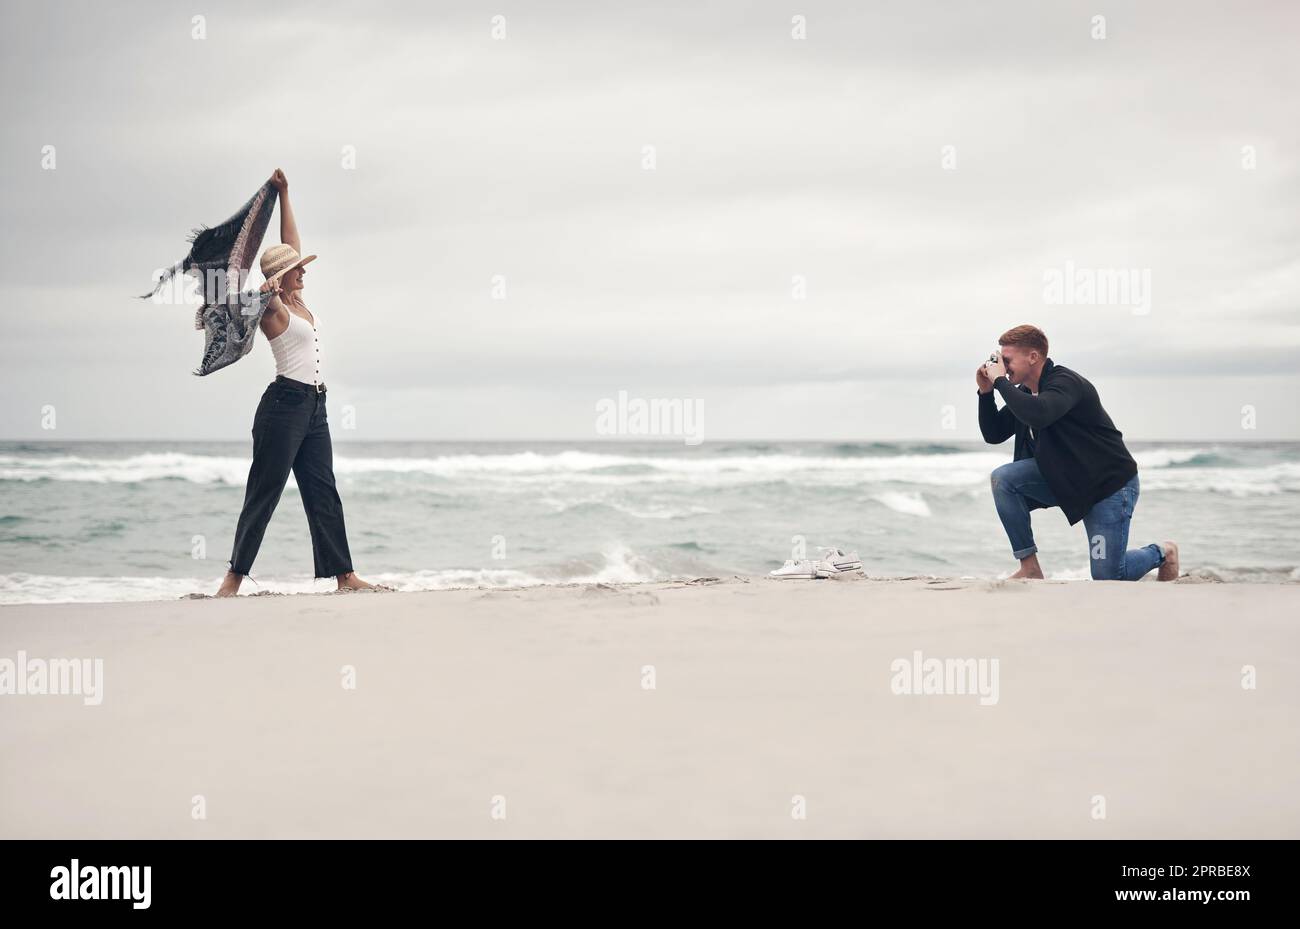 Strike a pose, babe. a man taking pictures of his girlfriend while spending time at the beach. Stock Photo